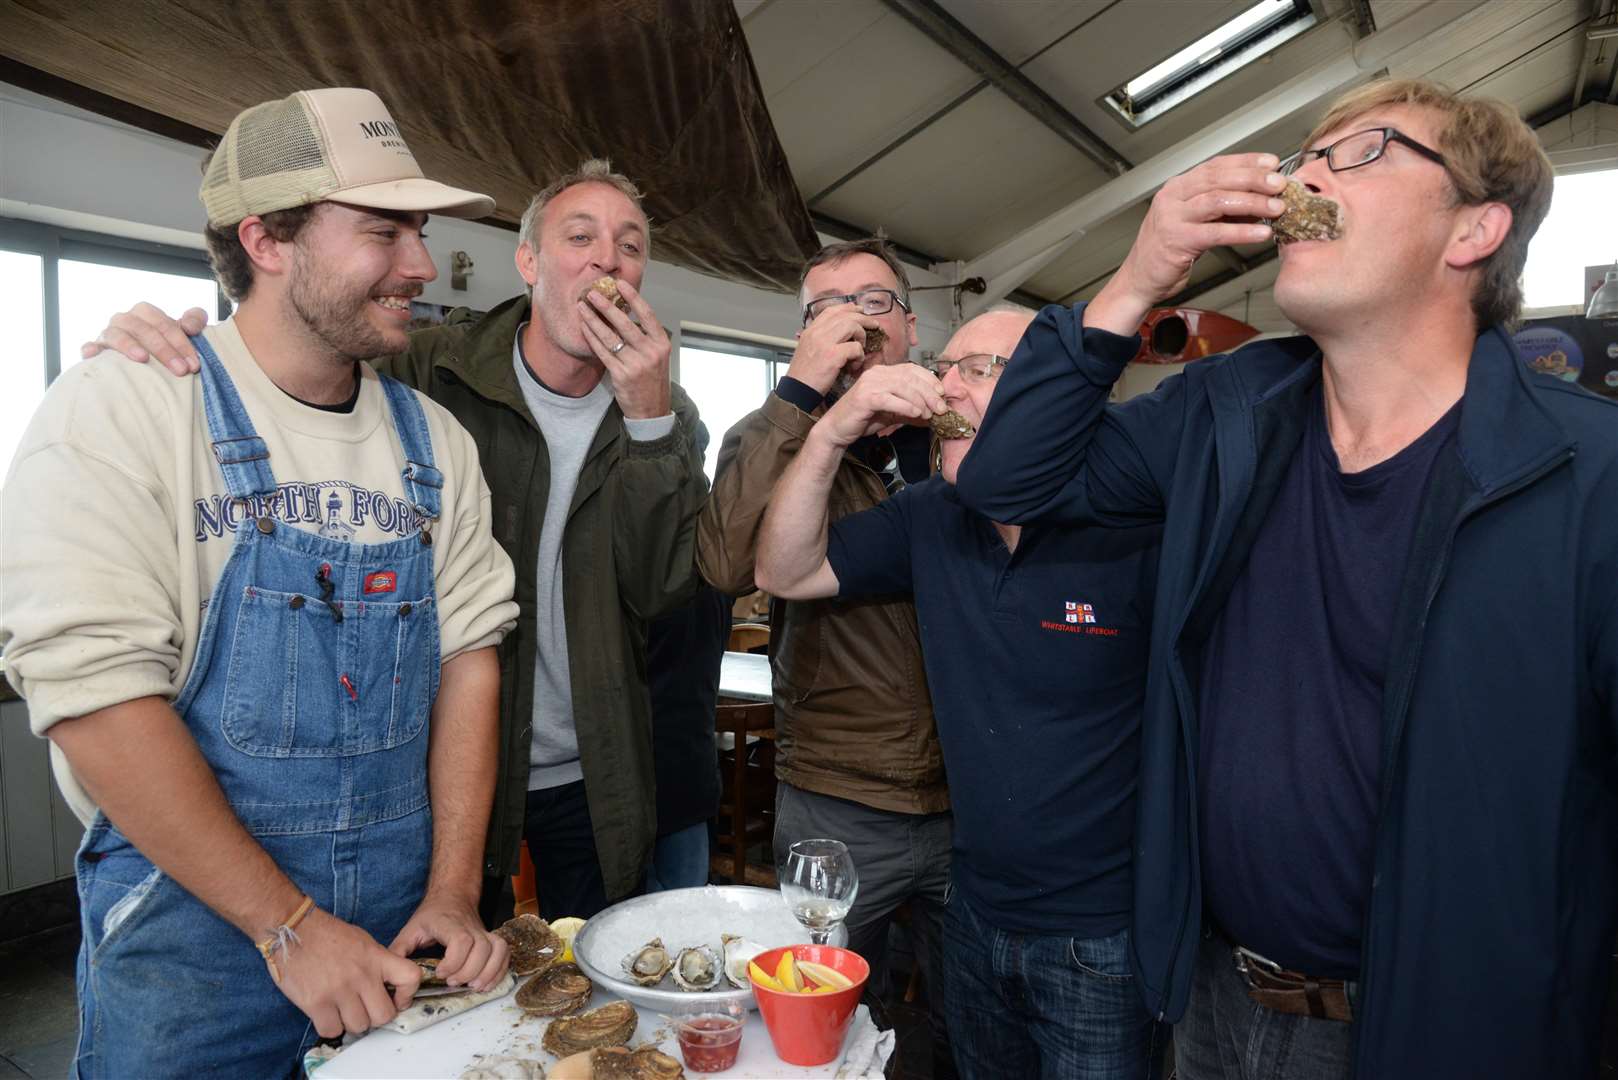 William Green opens oysters whilst Gus Corcoran of the Whitstable Oyster Festival, Robin Moxon and Paul Earles of Moxon Fresh Fish and Francis Lucey purification manager at at the Whitstable Oyster Fishery Company sample them at The Lobster Shack